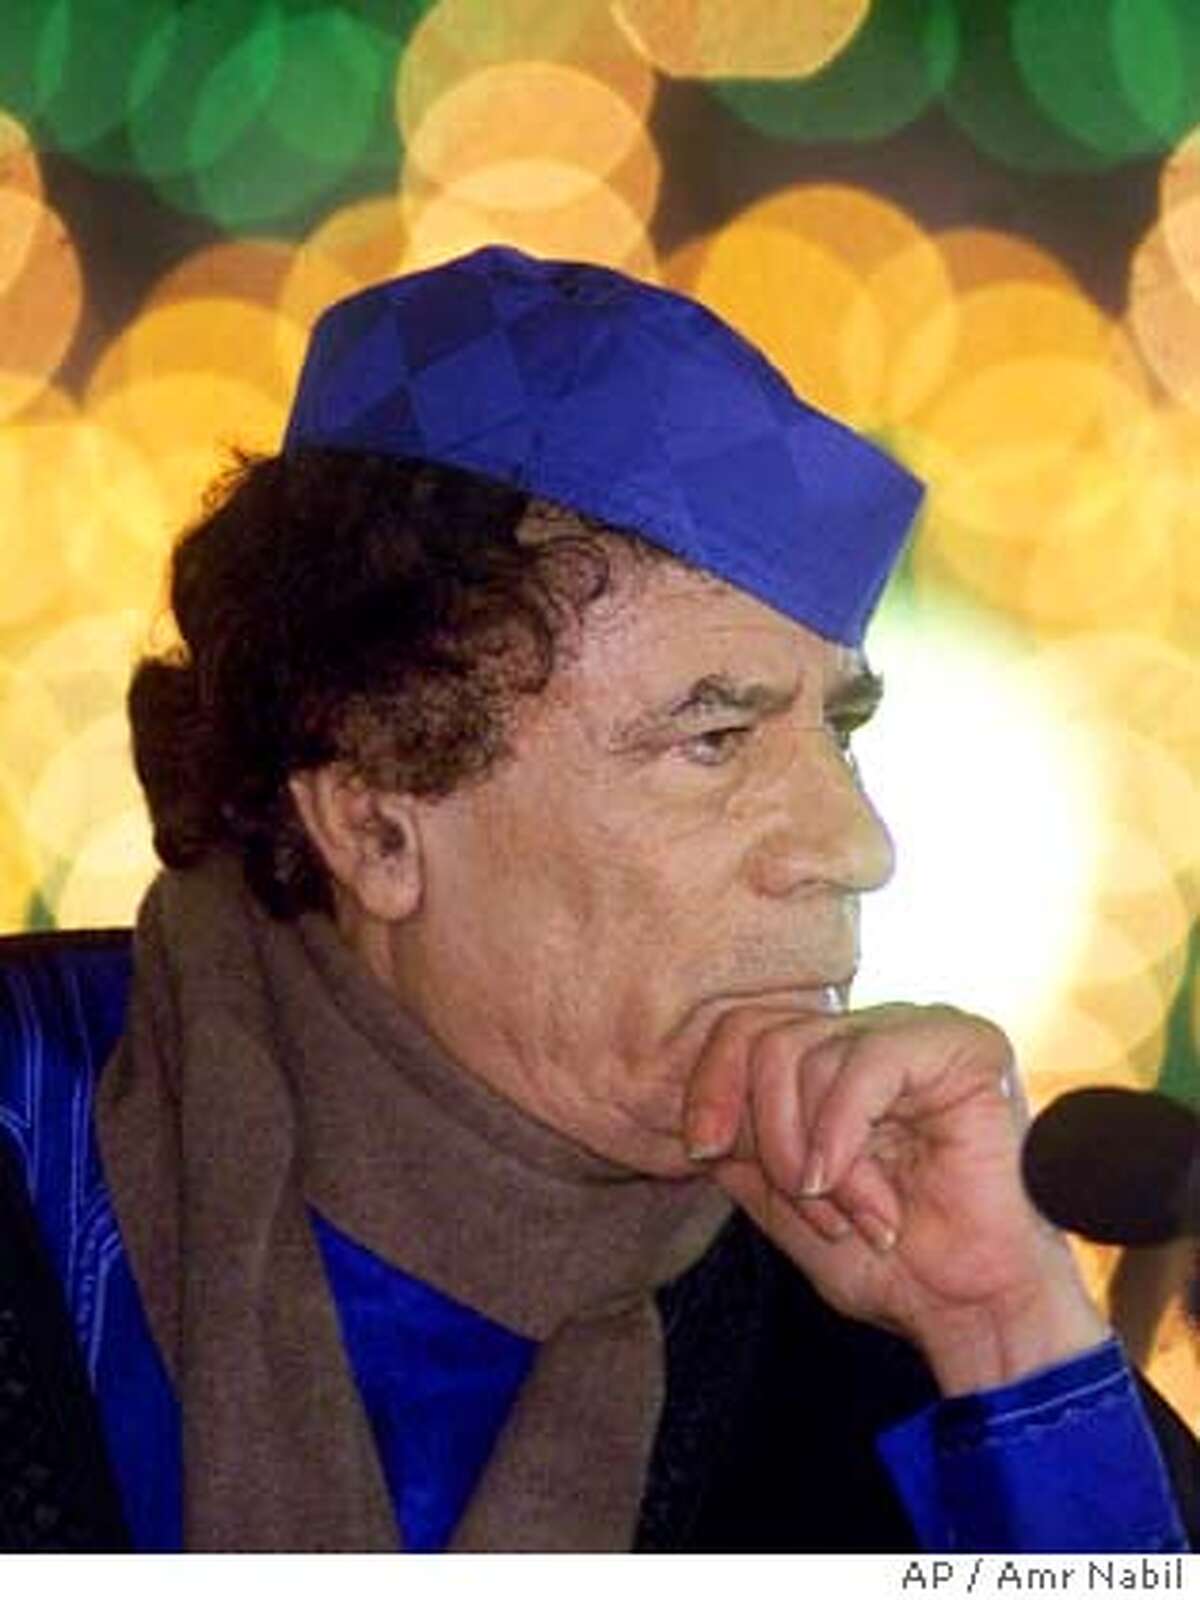 Libyan leader Moammar Gadhafi takes a question during a press conference in Triopli, Libya Monday, Feb. 5, 2001, in front of his home which was bombed by the U.S. Air Force on April 15, 1988. Gadhafi announced new evidence which he claims will prove that Libya is not involved in the 1988 Lockerbie bombing of Pan Am flight 103. A special Scpttich court in the Netherlands sentenced Abdel Basset Ali al-Megrahi to the minimum of 20 years in jail last week after finding him guilty in the attack. (AP Photo/Amr Nabil)